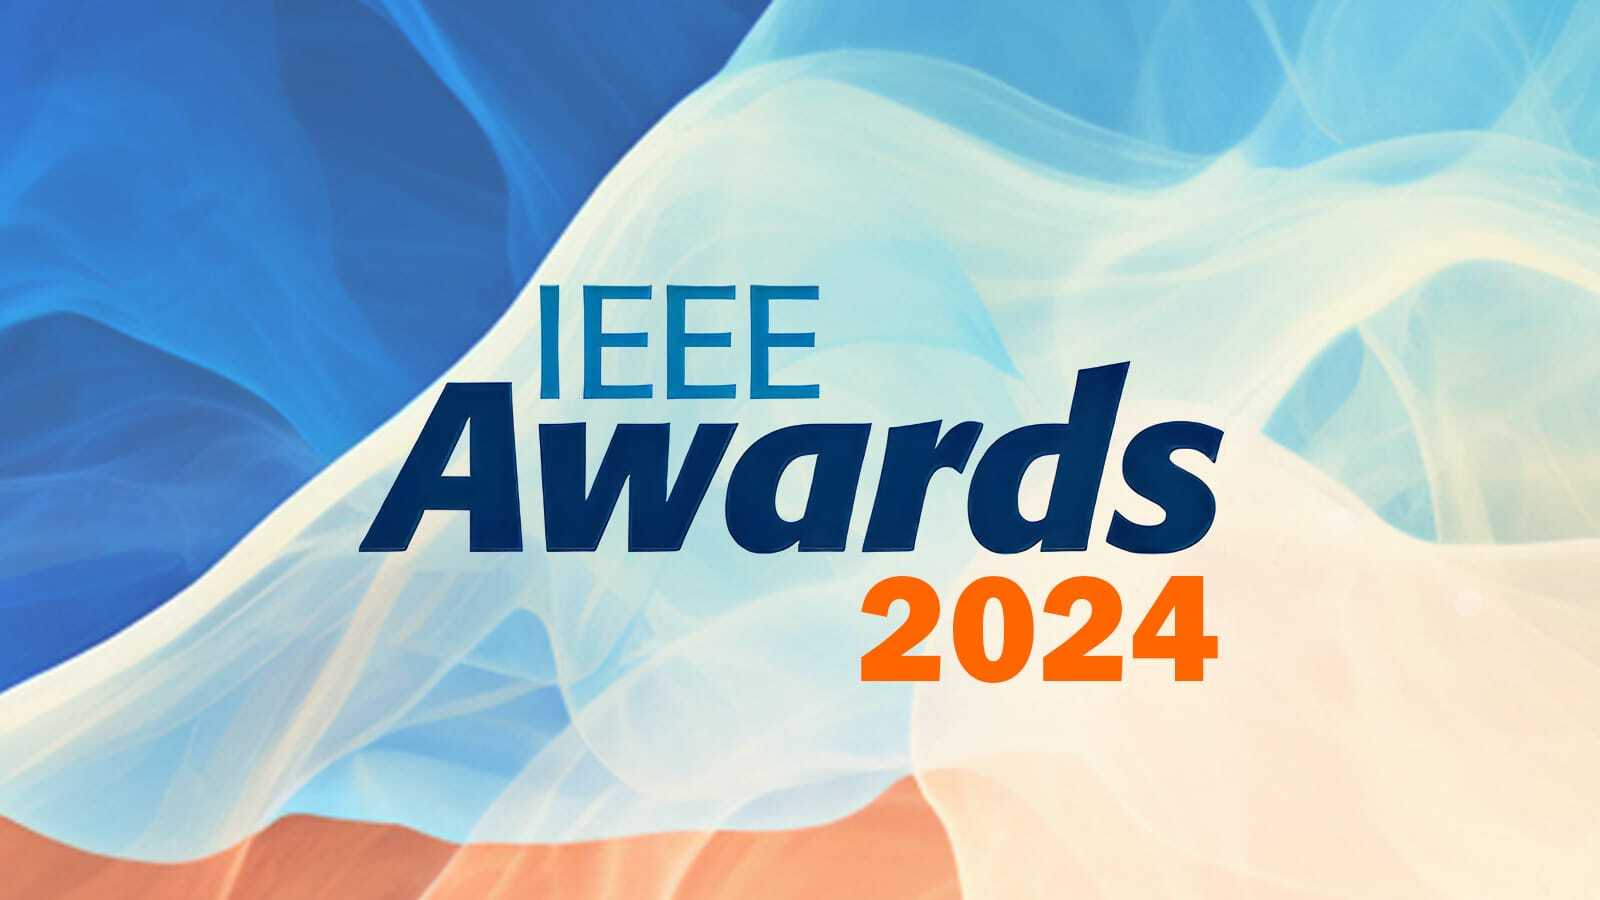 Graphic with words IEEE Awards 2024.